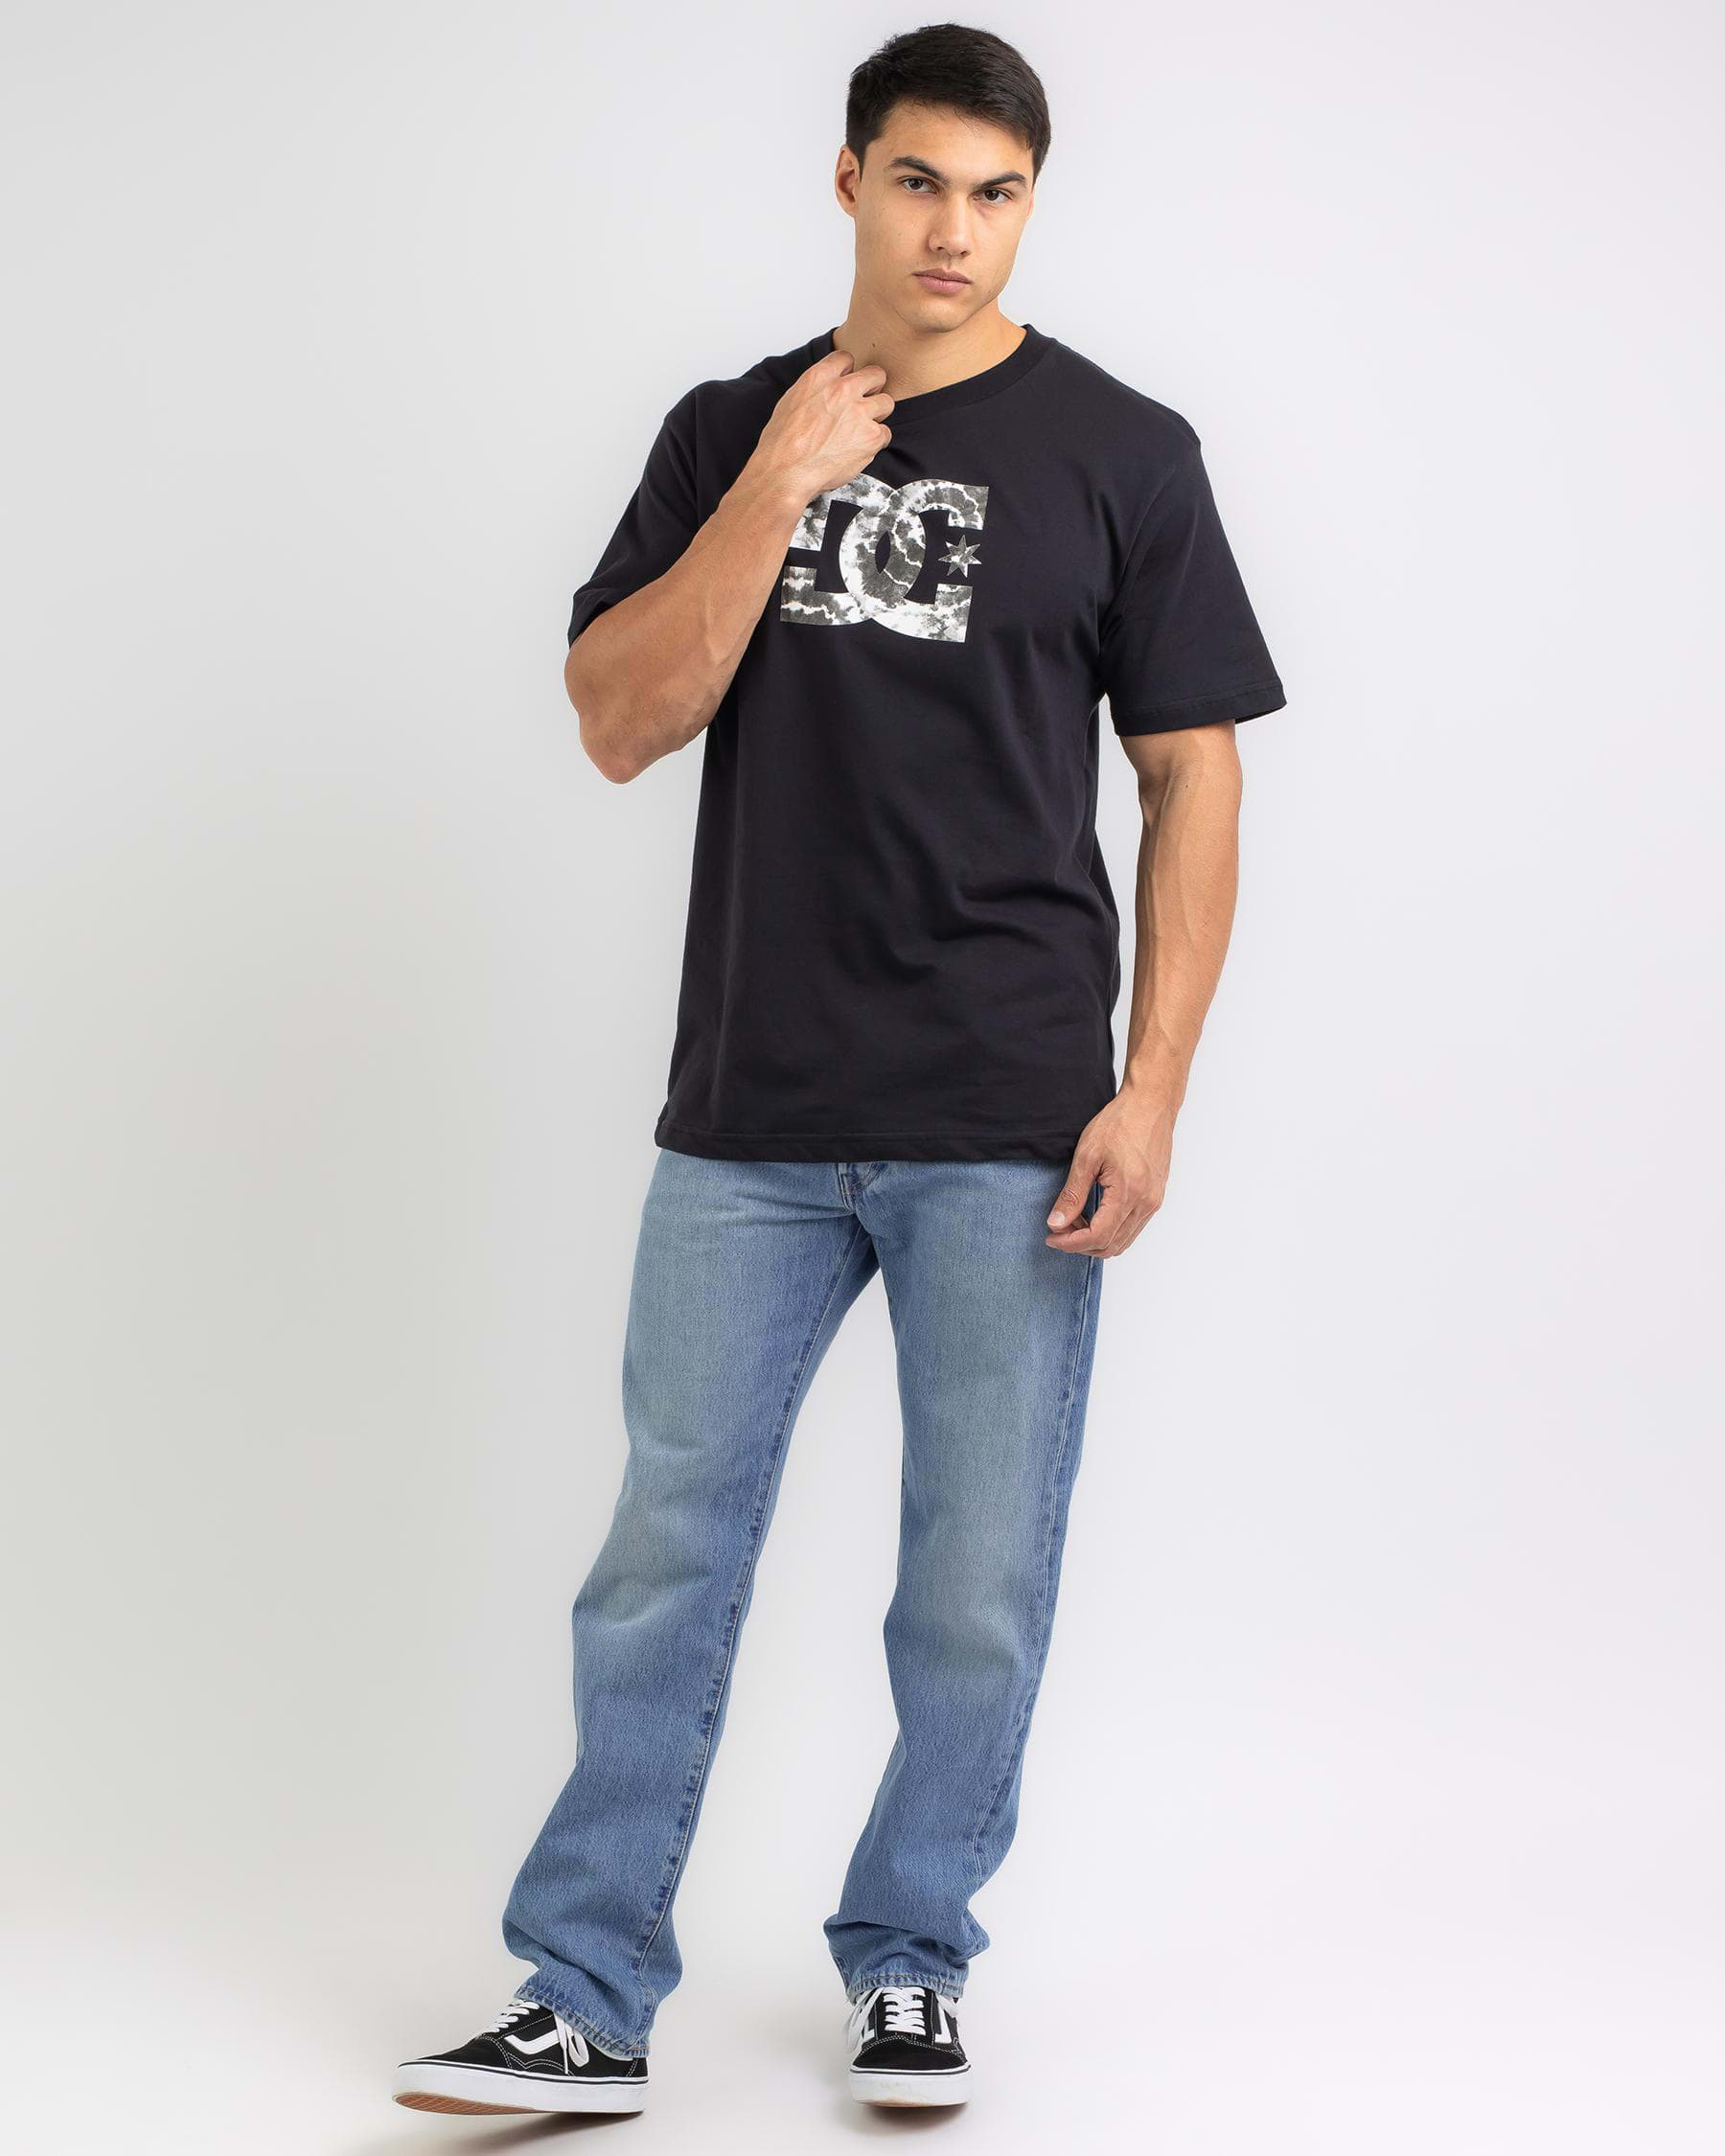 DC Shoes DC Star Fill City Beach FREE* Shipping T-Shirt - & United Easy In Black States Returns 